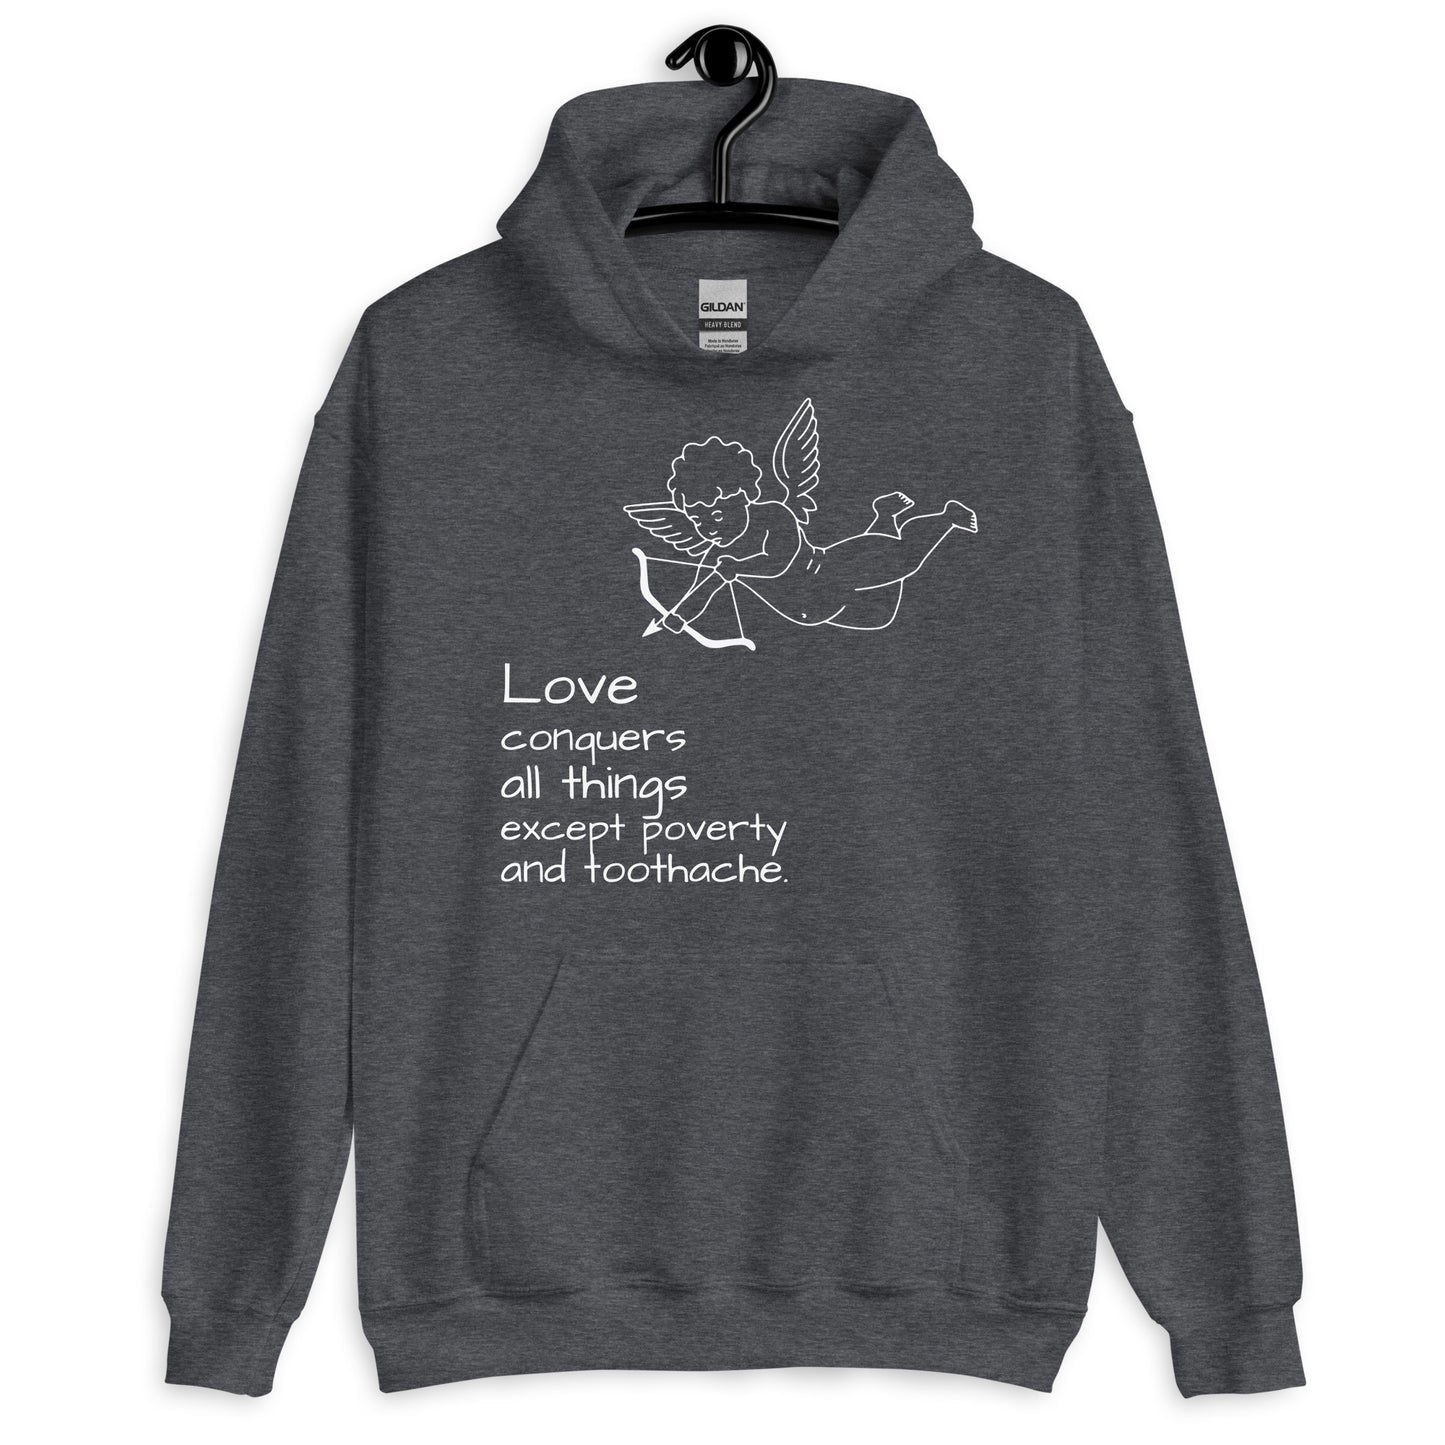 LOVE Conquers All Things Except Poverty and Toothache Unisex Hoodie, Mae West Quote, Cinema Quote, Funny design, (anti) valentine design